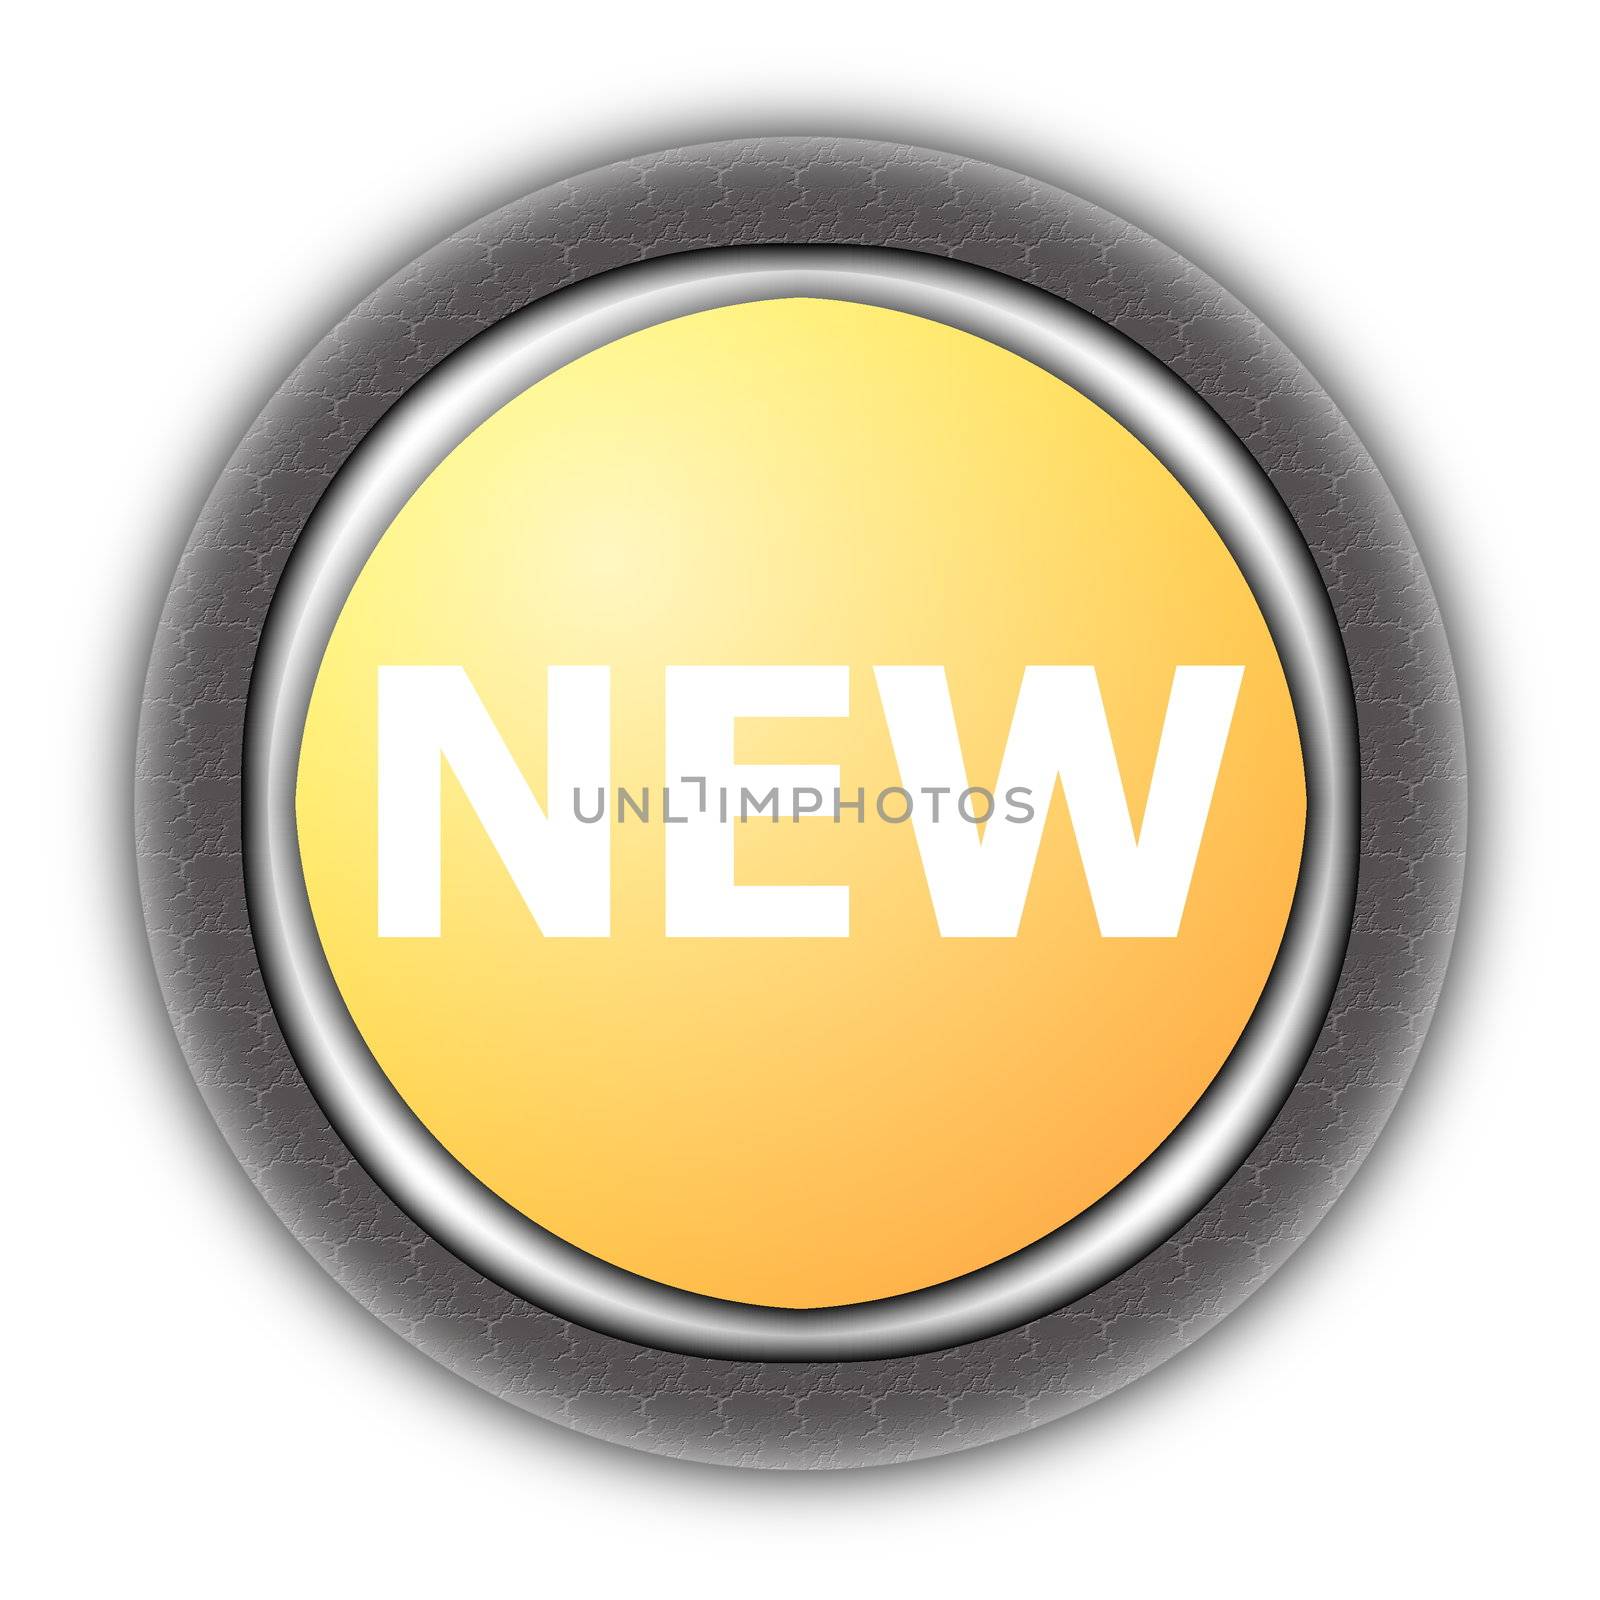 new button for a internet website isolated on white